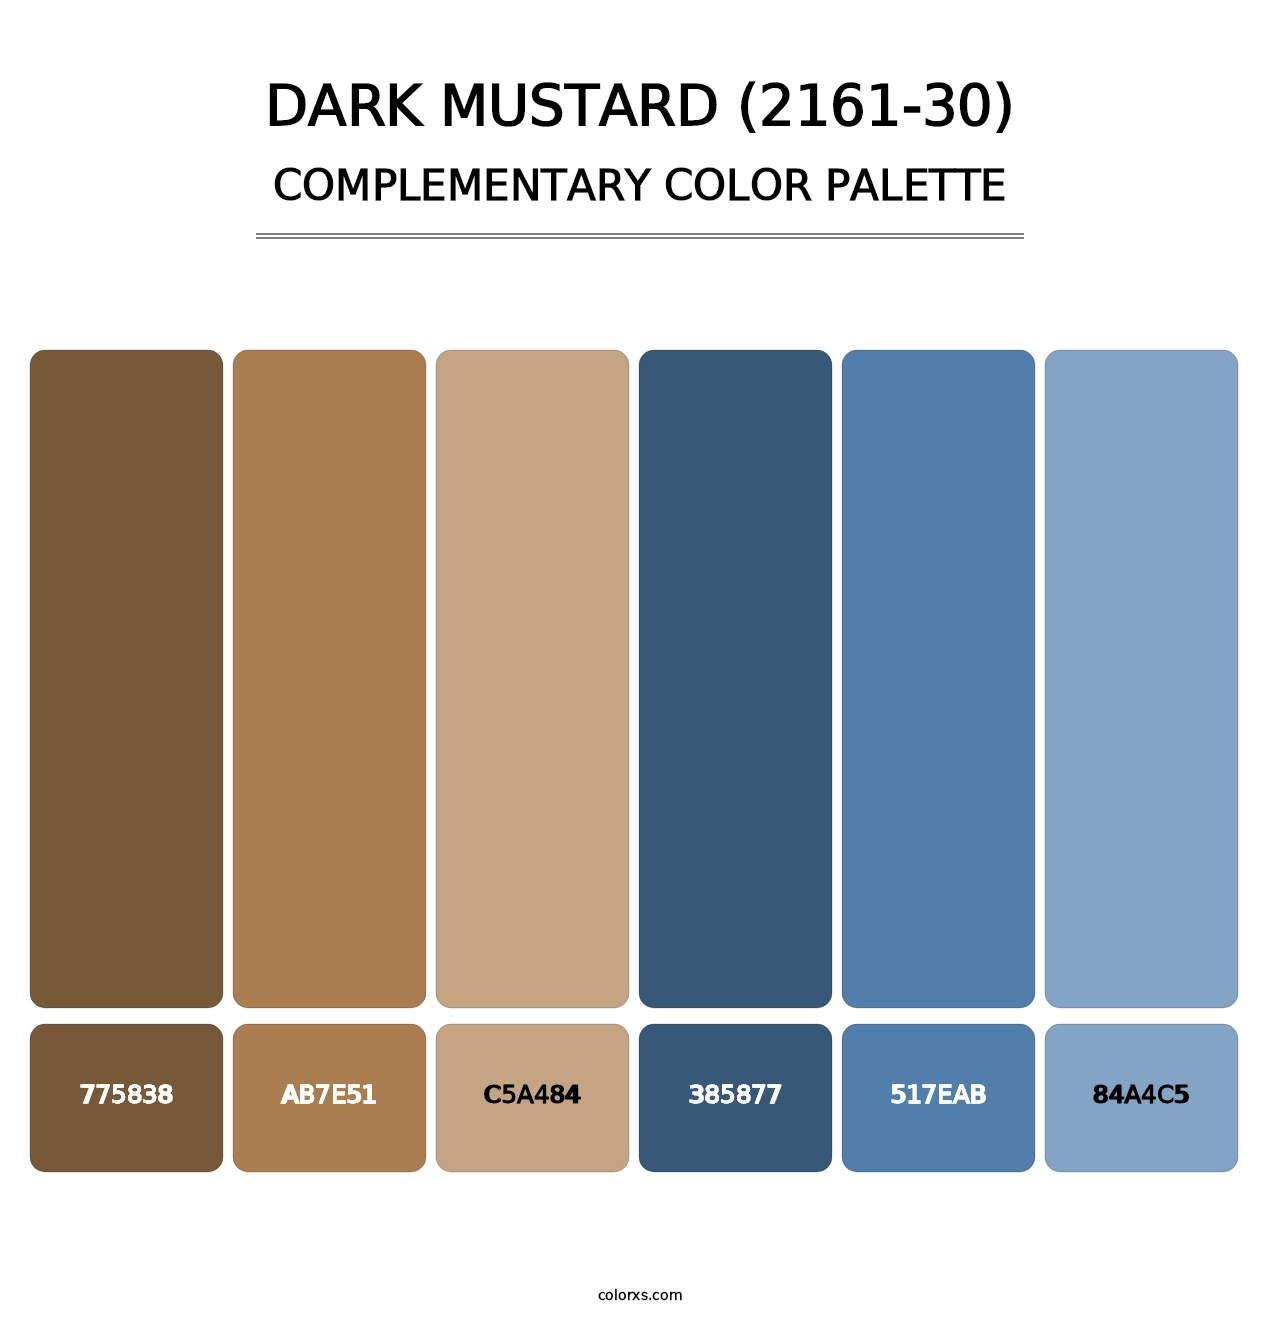 Dark Mustard (2161-30) - Complementary Color Palette